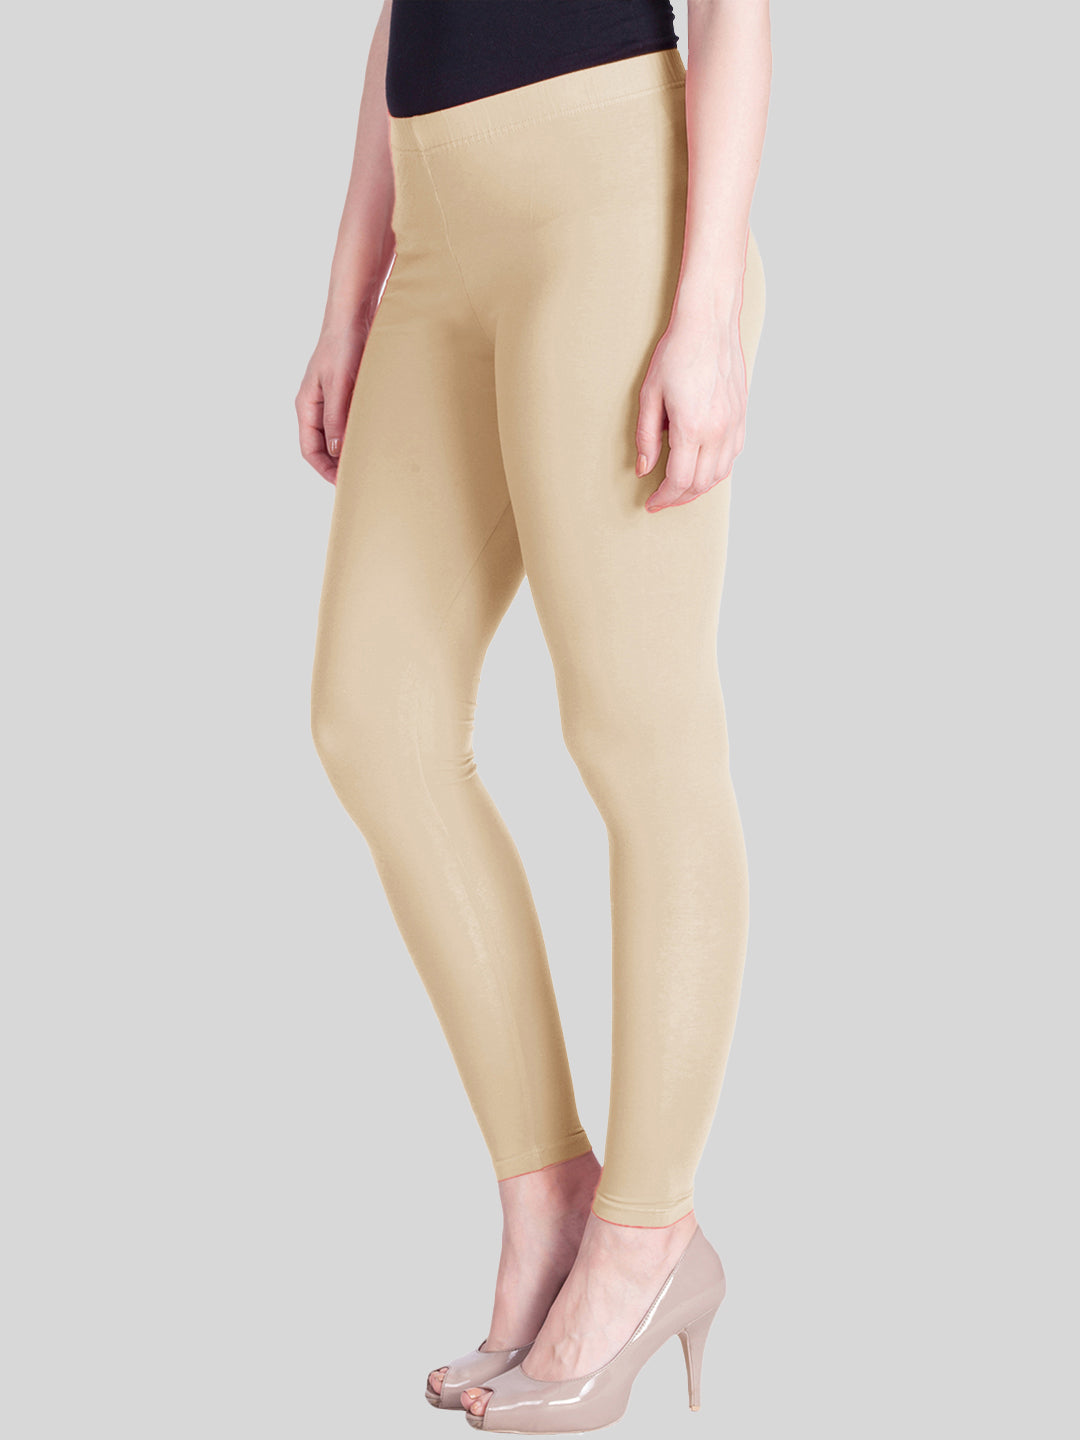 Buy KPC Beige Women's Slim Fit Cotton Ankle Length Leggings Legging for  Women Sizes: S = Small Size for 24-28 inches Waist, L = Regular Size (Free  Size) for 28-36 inches WAIS at Amazon.in